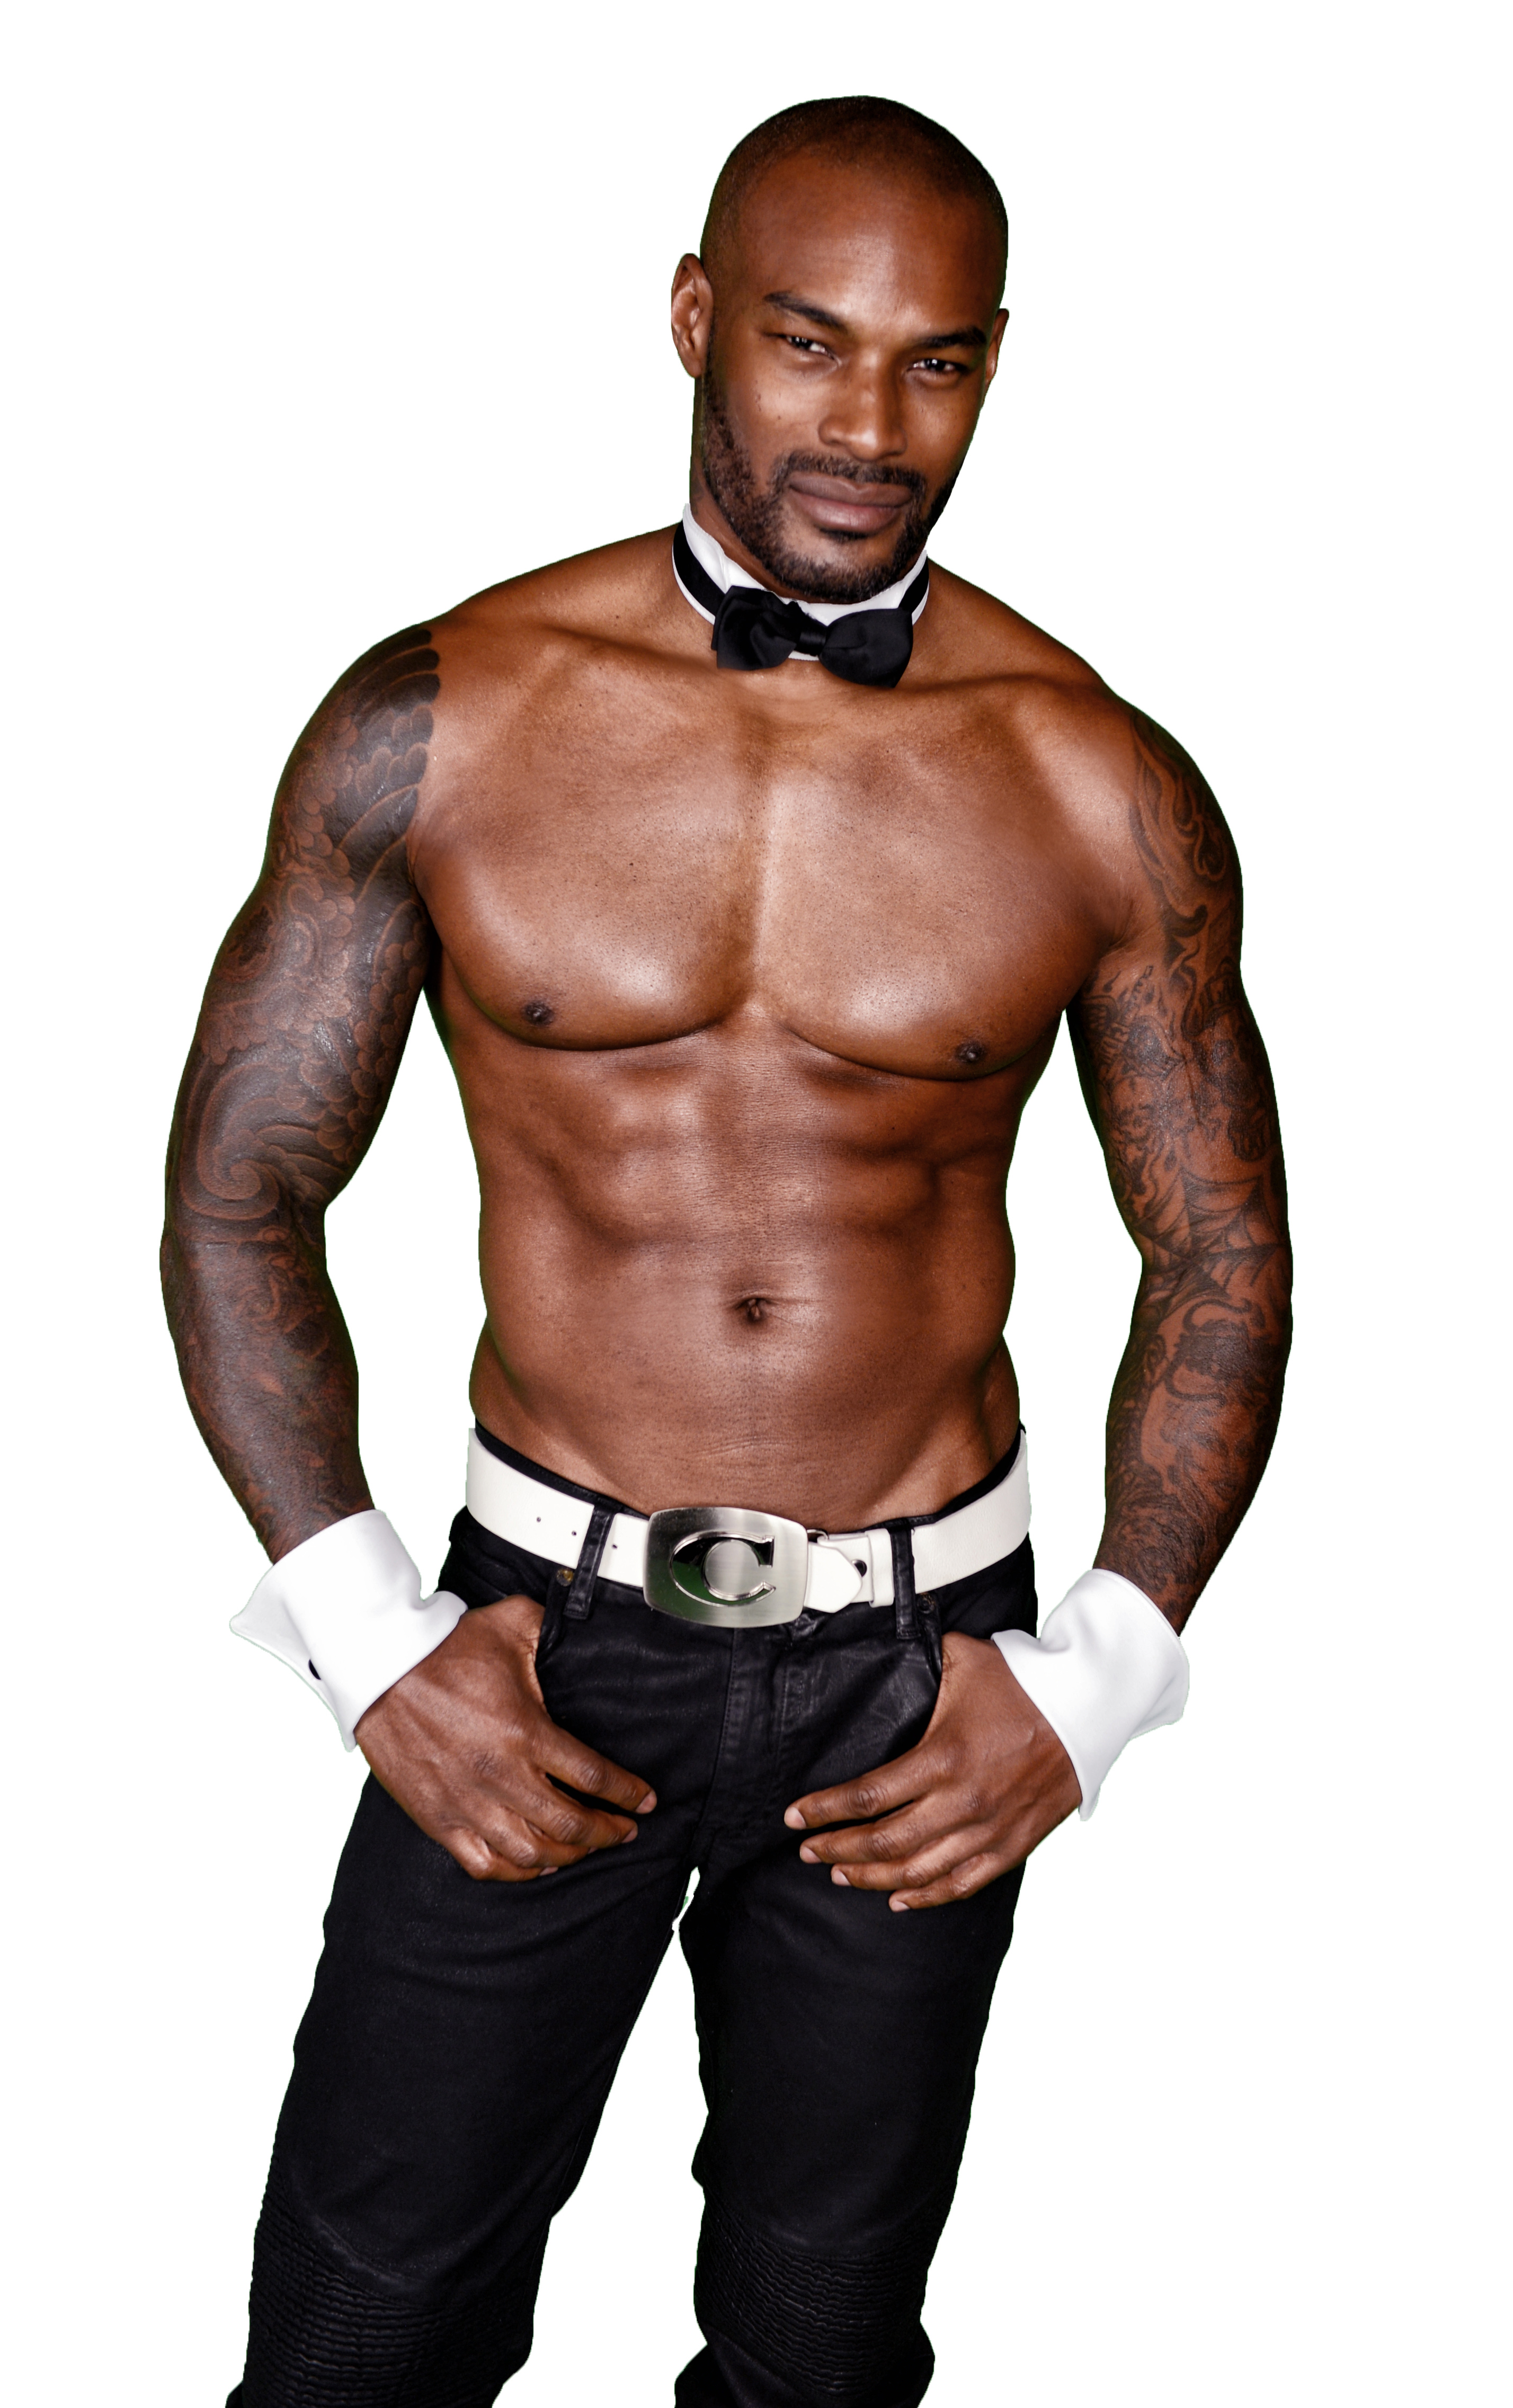 Tyson Beckford signs residency deal with Chippendales at Rio All-Suite Hotel & Casino in Las Vegas.